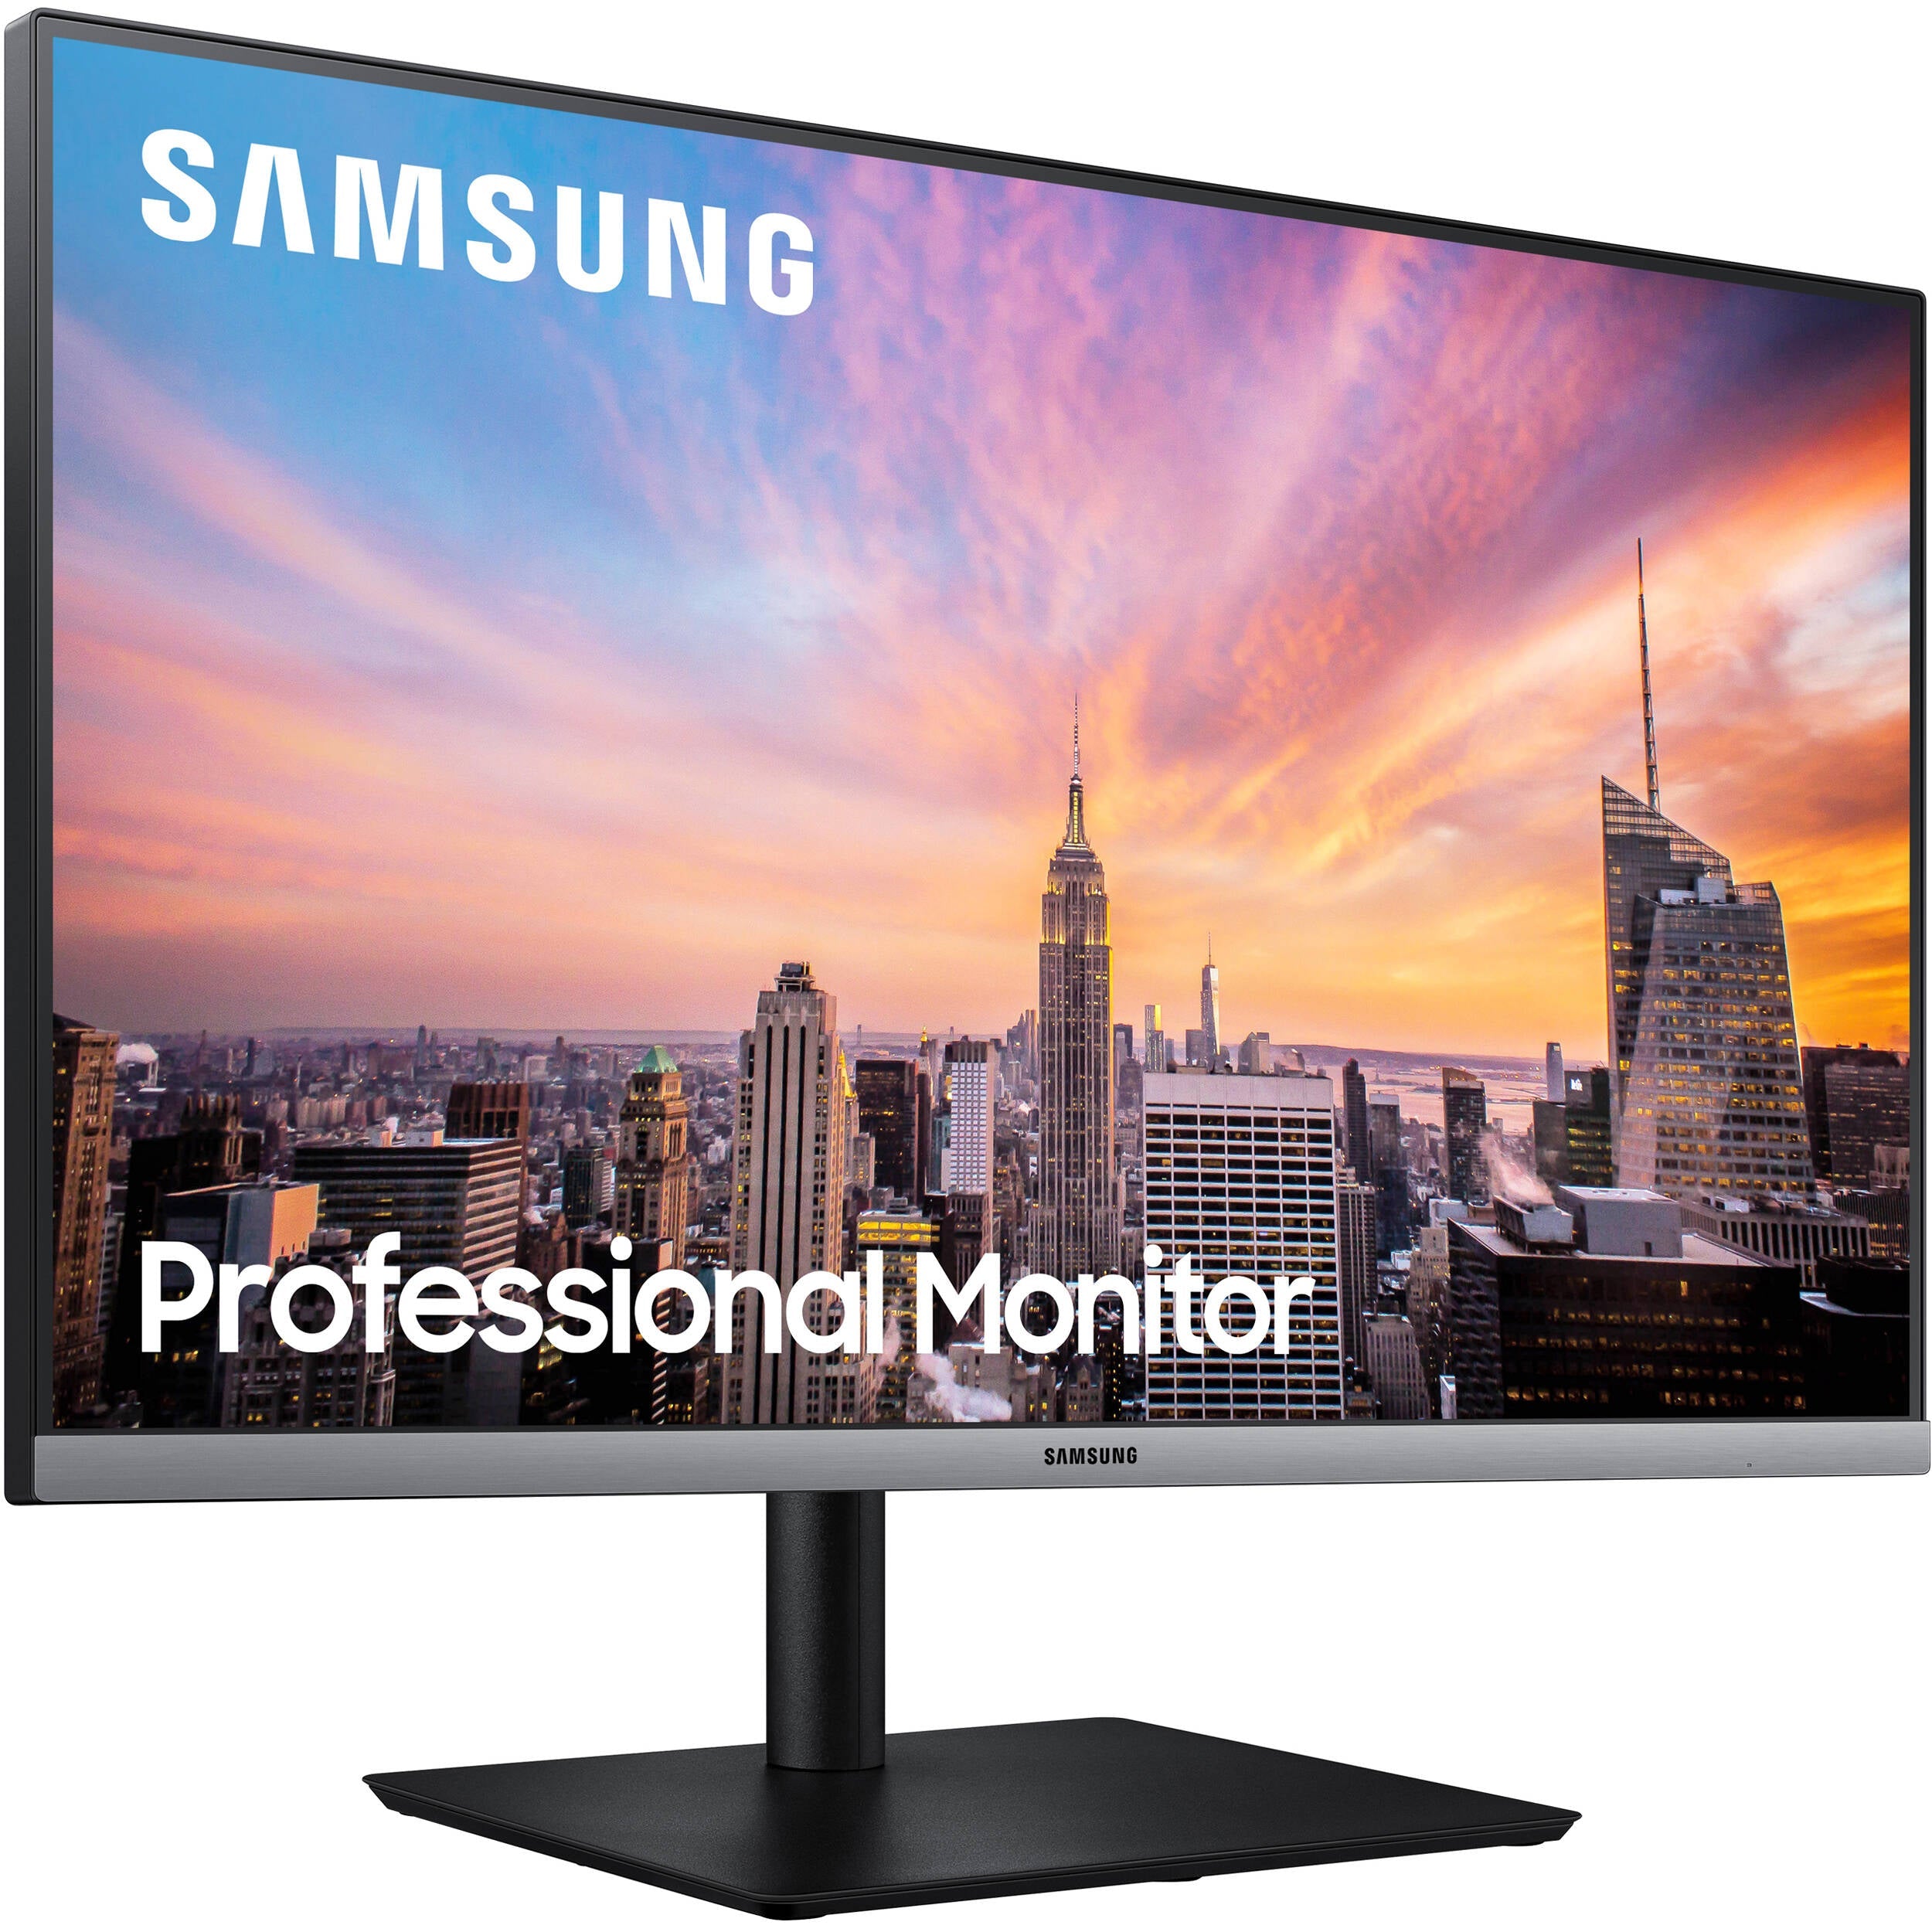 Samsung LS27R650FDNXZA 27" SR650 Series 1920 x 1080 75Hz LED Monitor for Business - Certified Refurbished